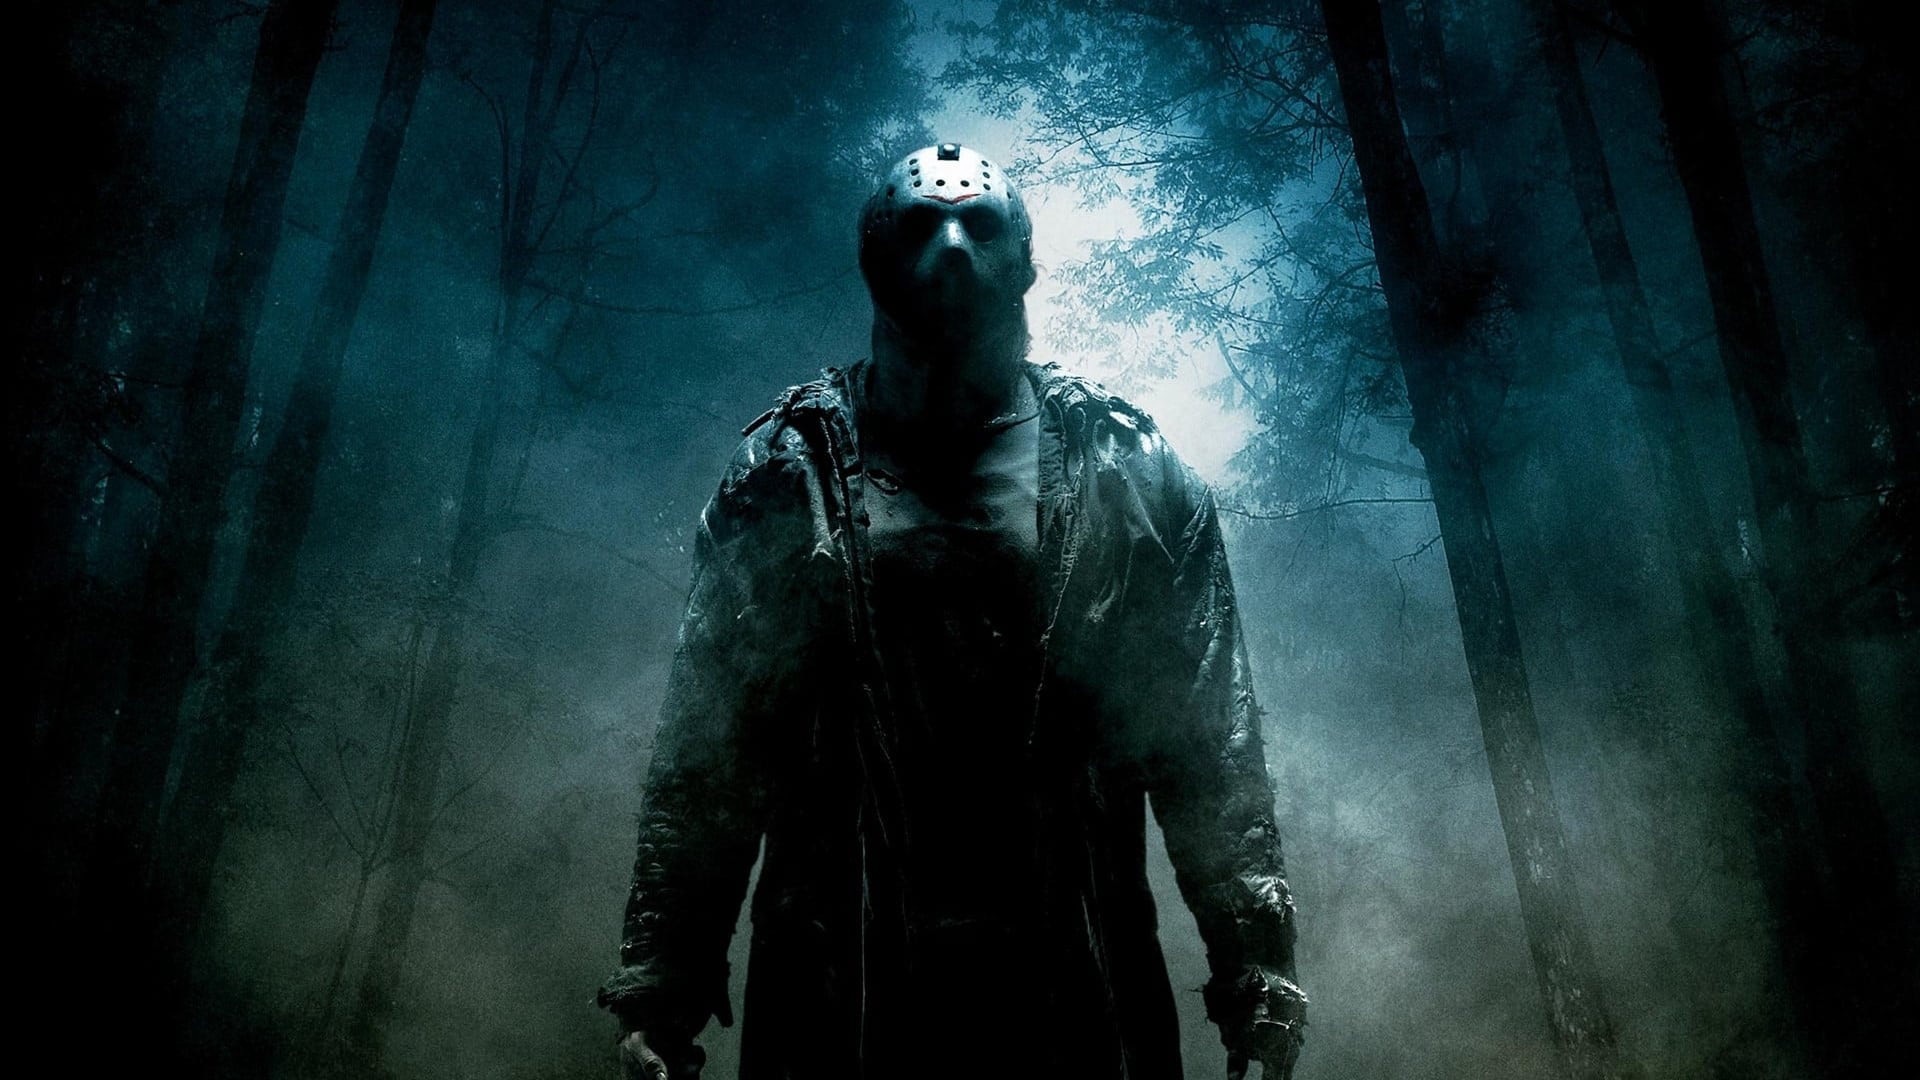 Friday the 13th - Friday the 13th (2009)